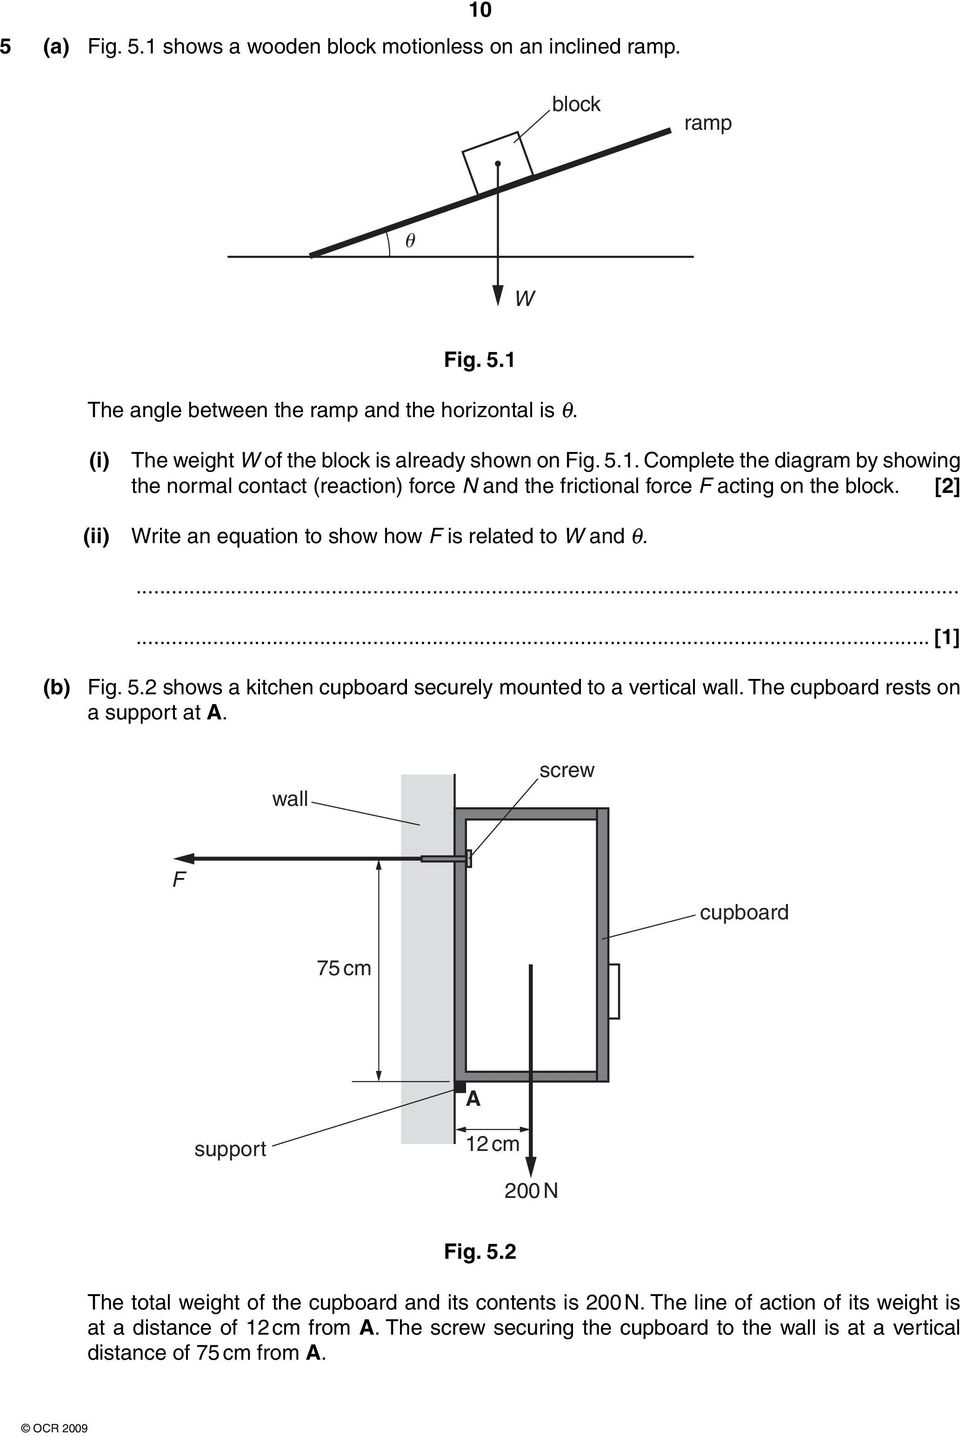 [2] (ii) Write an equation to show how F is related to W and θ....... [1] (b) Fig. 5.2 shows a kitchen cupboard securely mounted to a vertical wall. The cupboard rests on a support at A.